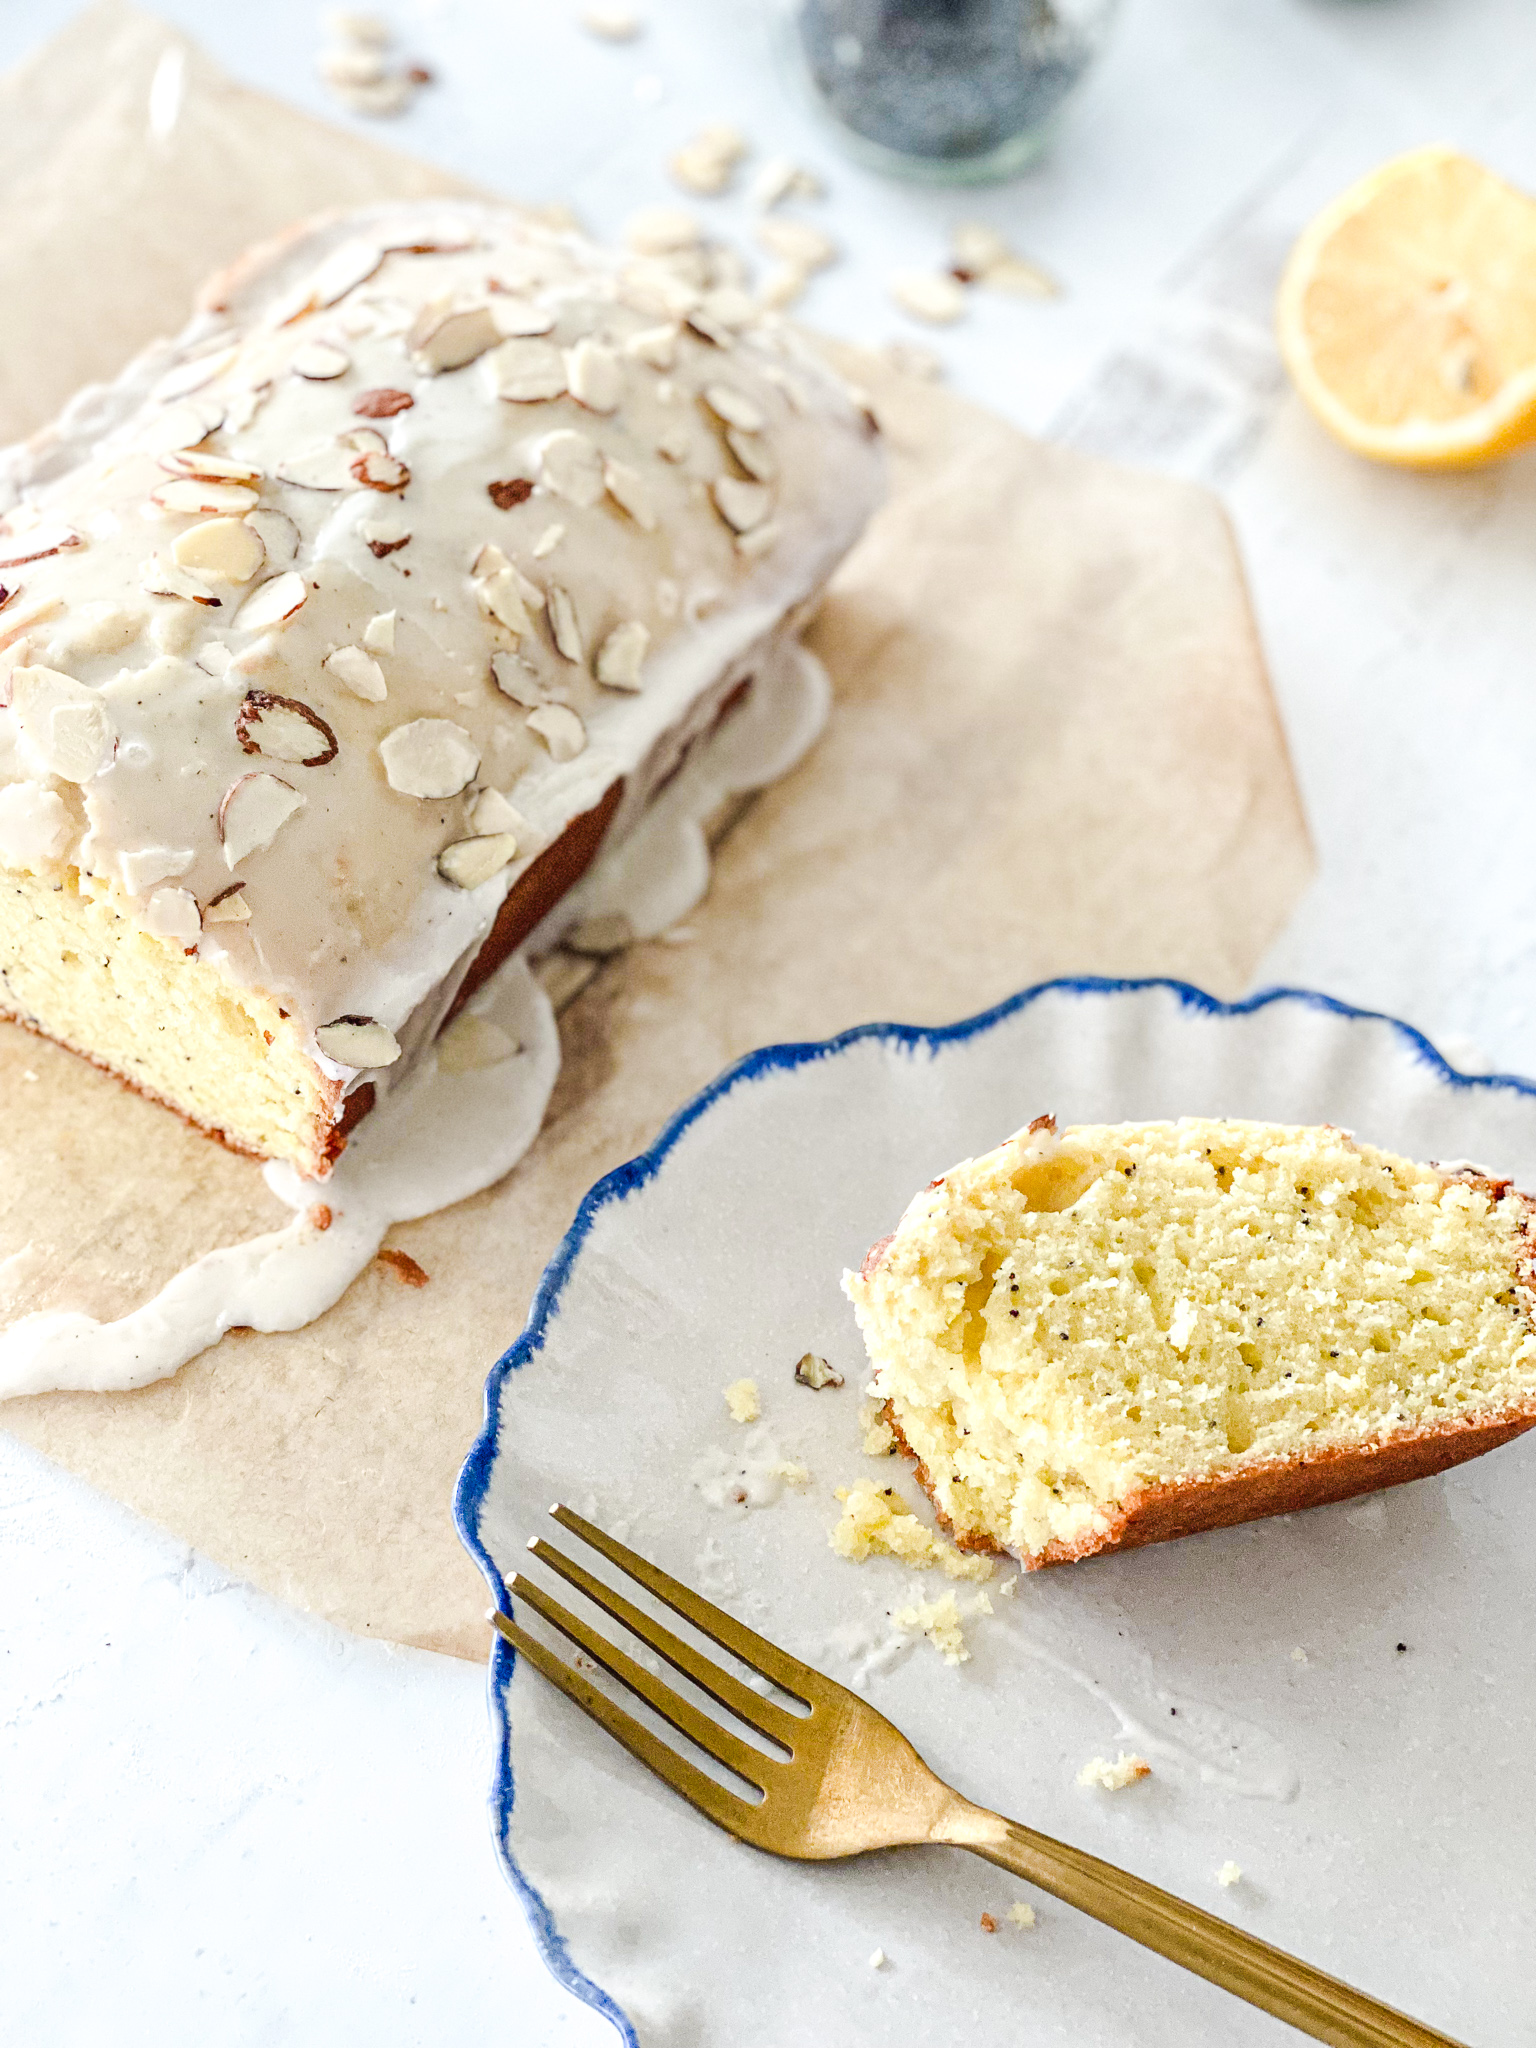 Poppyseed lemon loaf cake recipe with a vanilla bean glaze topped with sliced almonds.